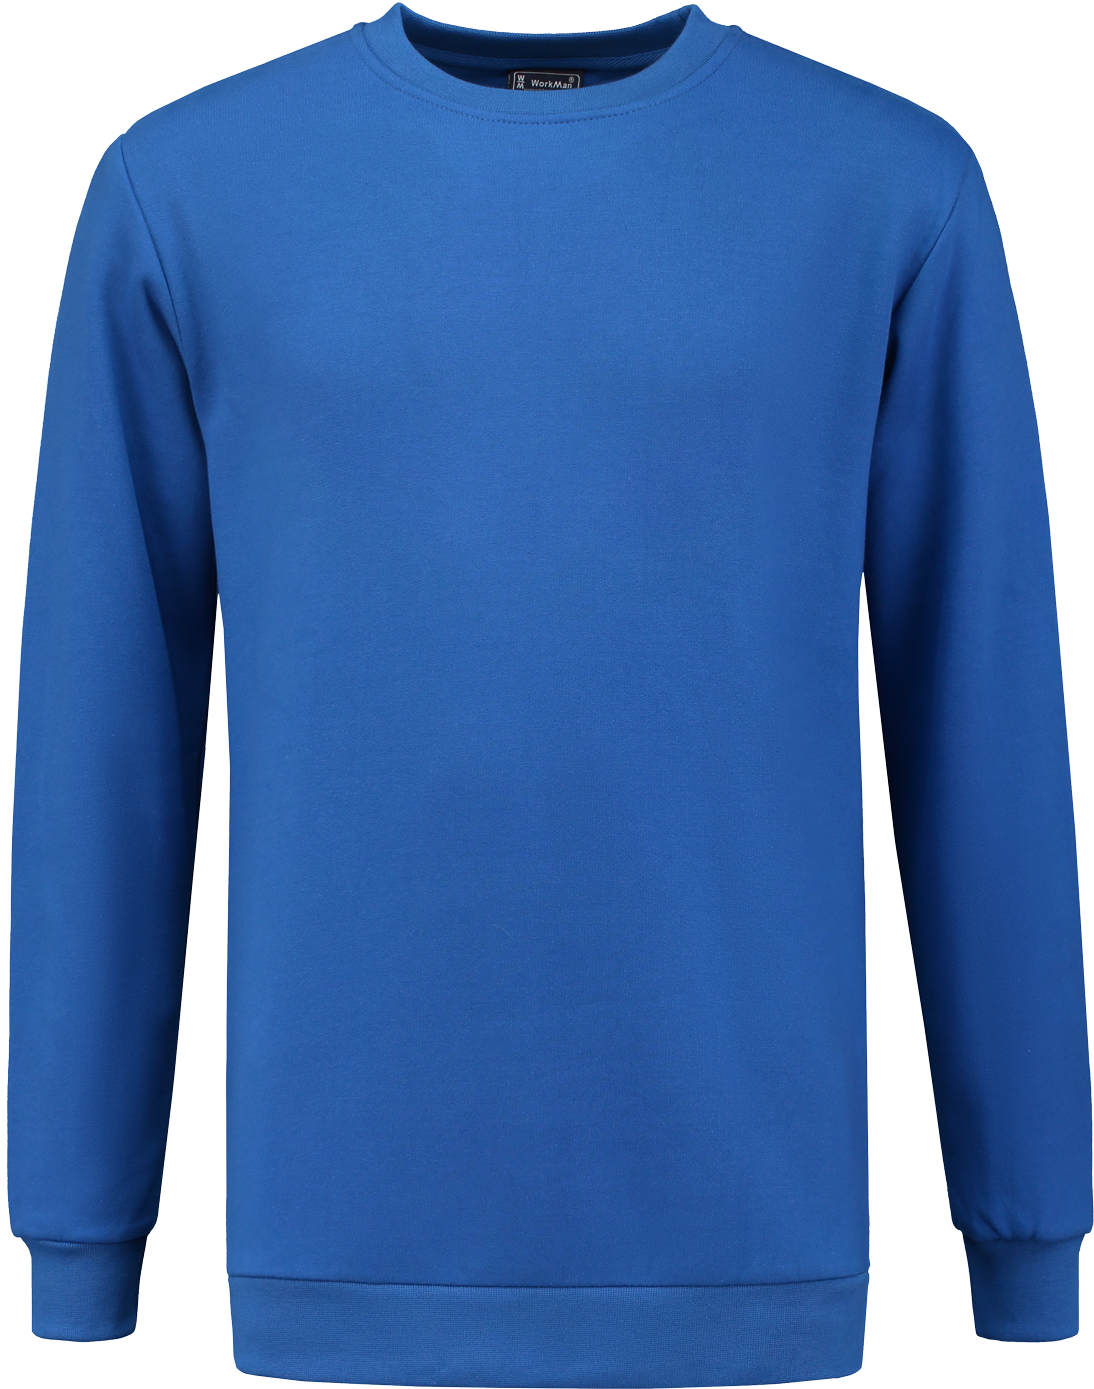 8204 Sweater Outfitters Royal Blue